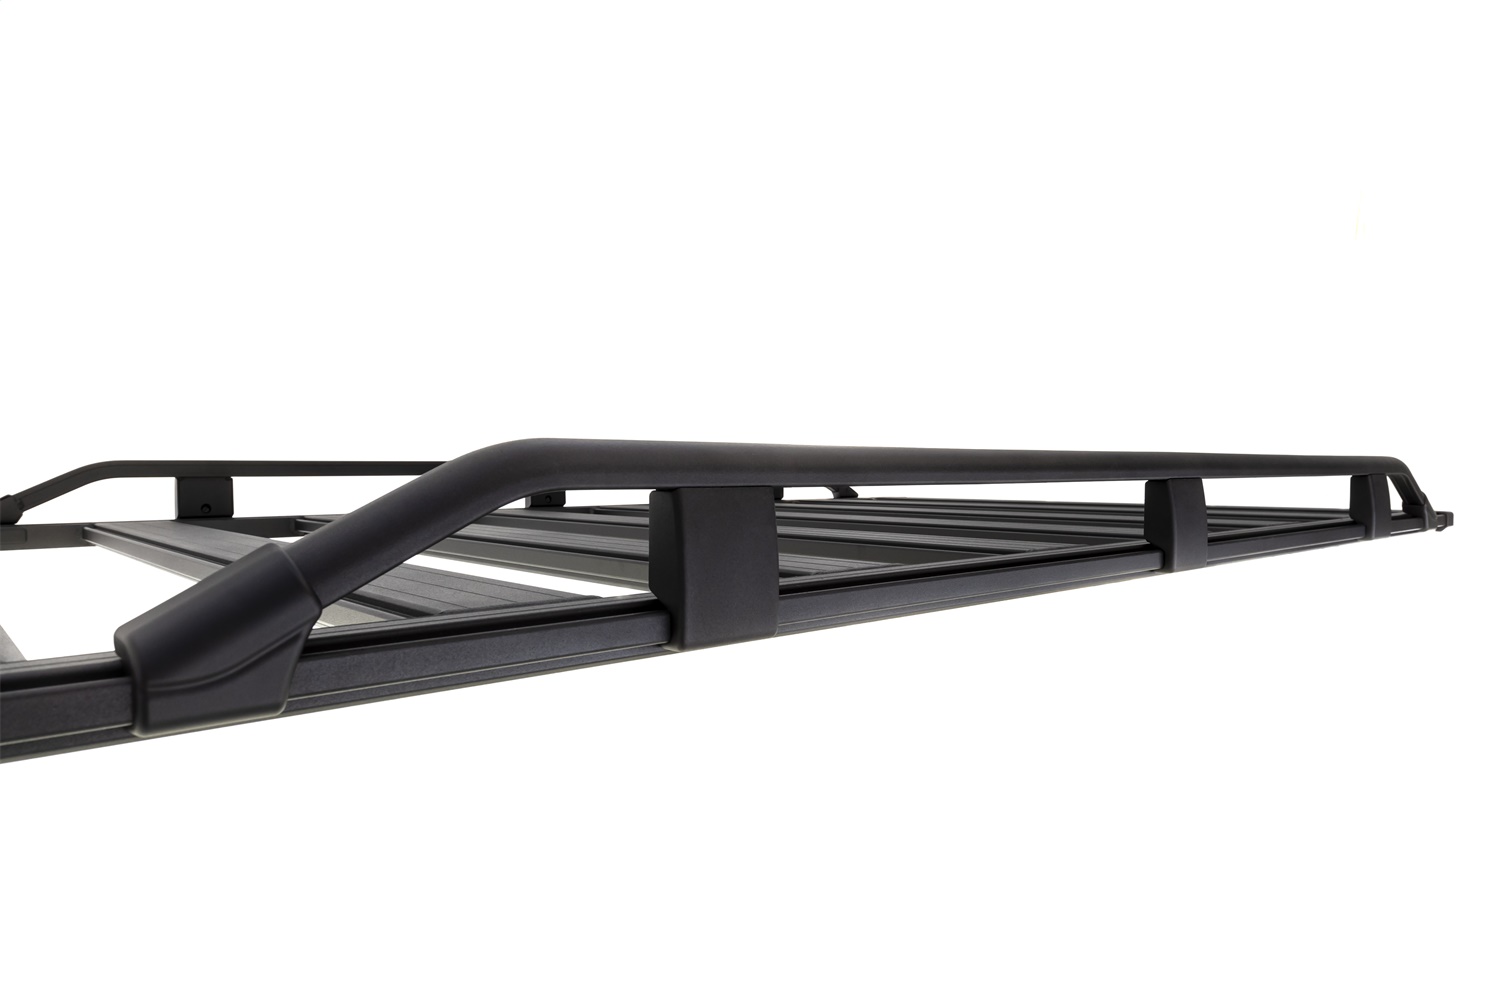 Picture of ARB 1780130 Arb Base Rack Guard Rail